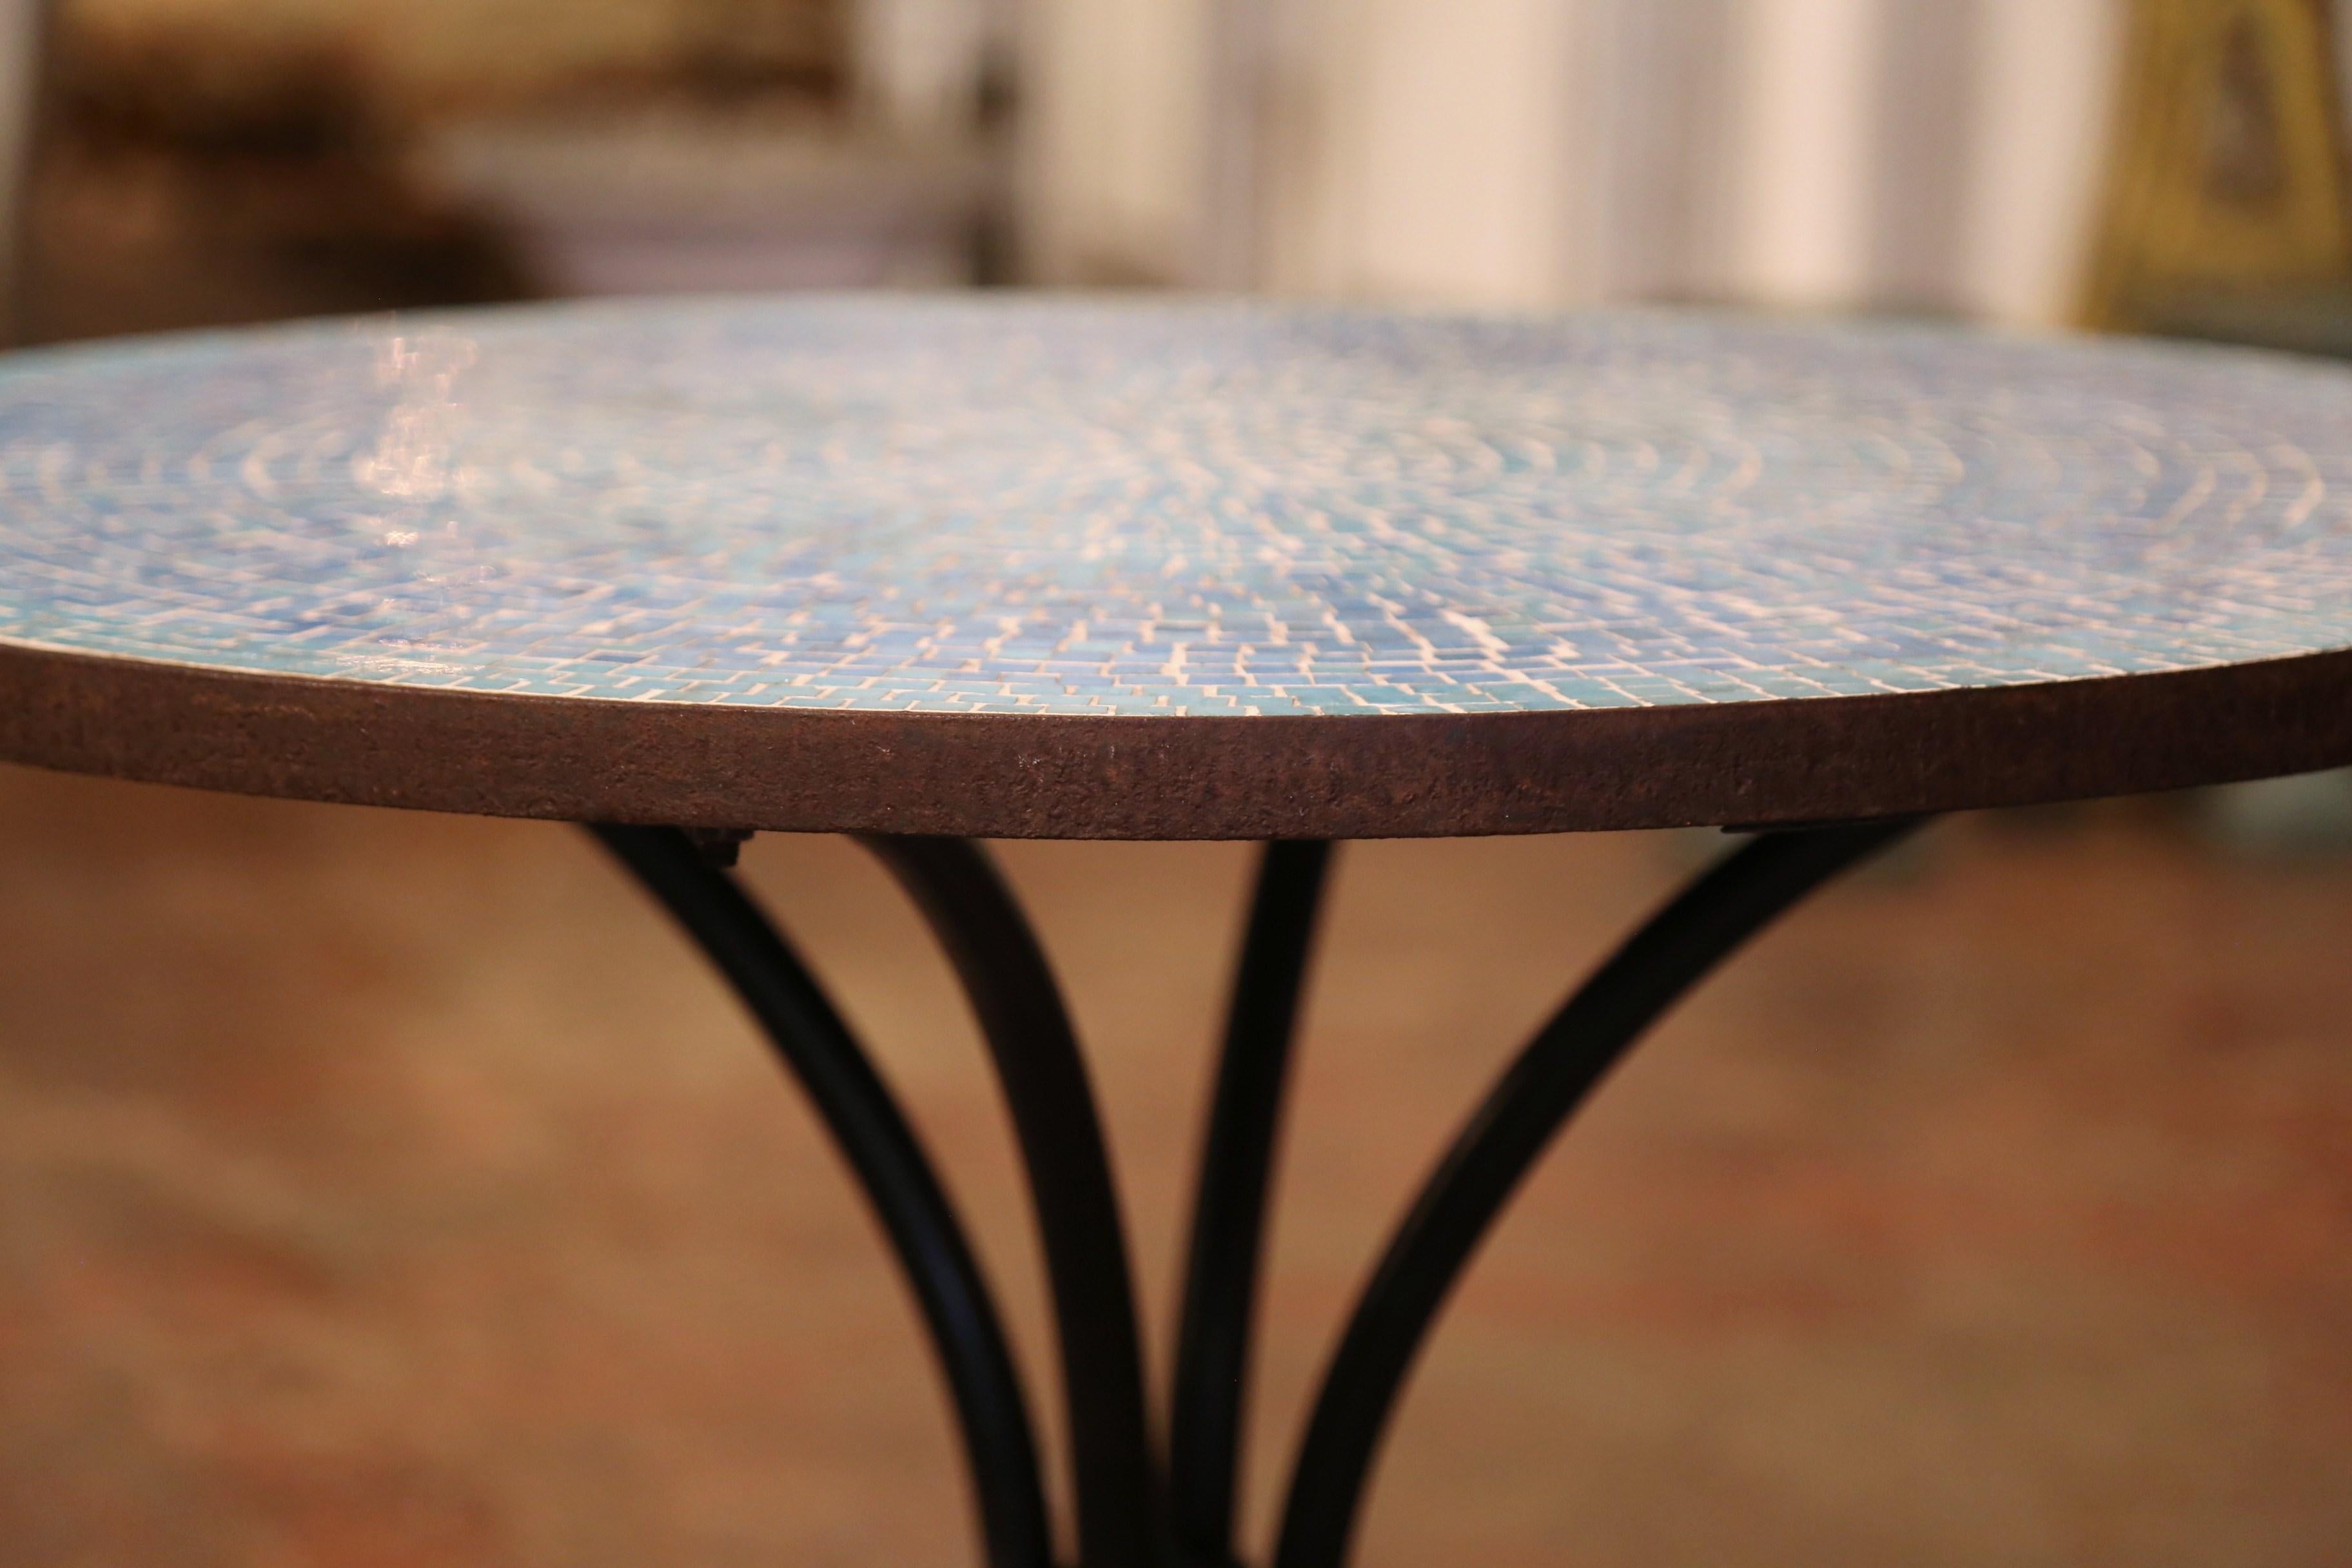 Early 20th Century Parisian Iron Bistrot Table with Mosaic Tile Top 2